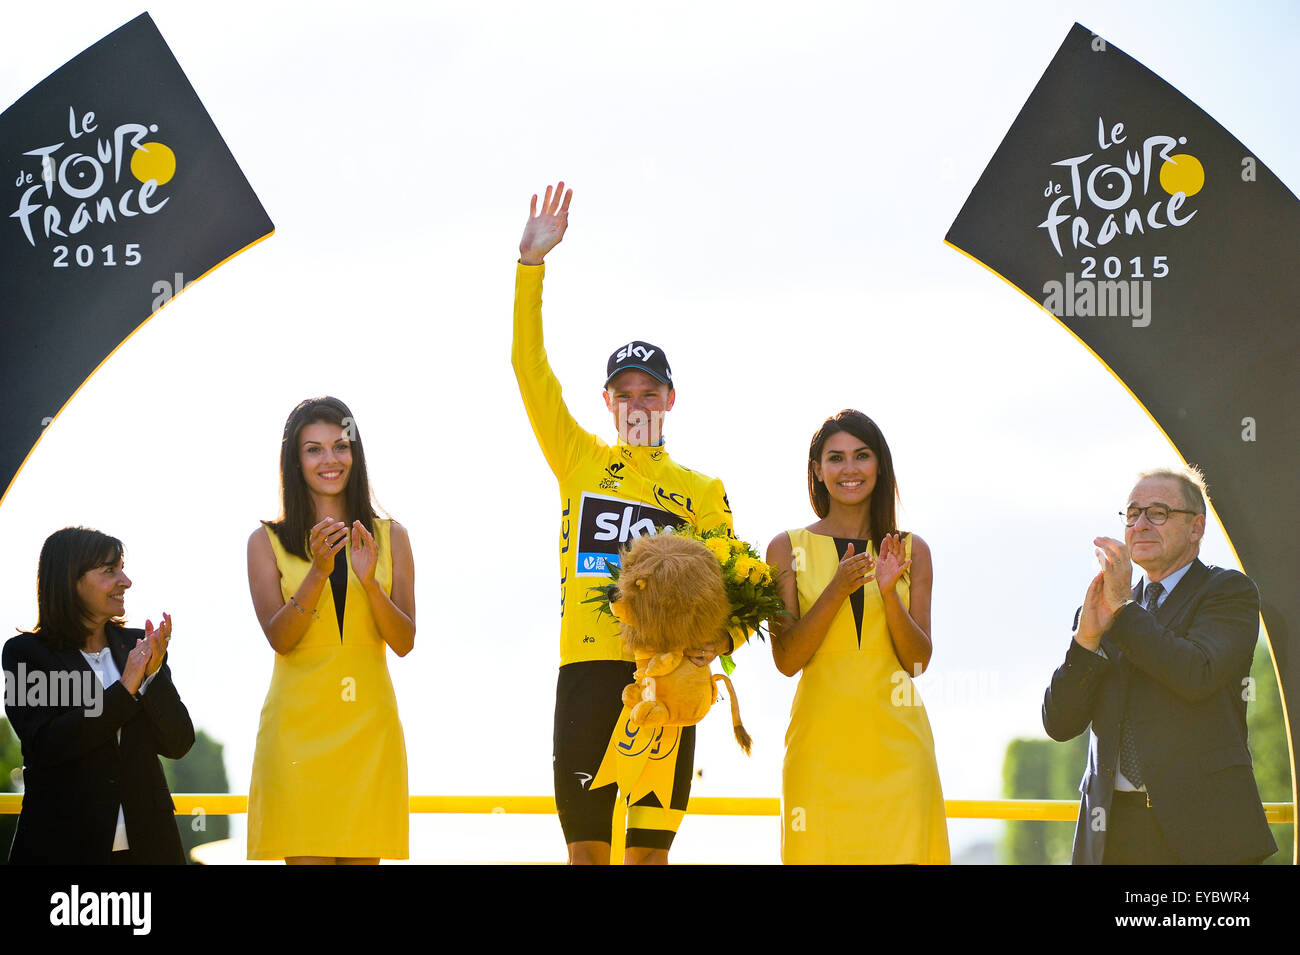 Paris, France. July 26, 2015. Chris Froome (GBR) of Team Sky wearing the yellow jersey after winning the 2015 Tour de France in Paris. Photo: Miroslav Dakov/ Alamy Live News Stock Photo